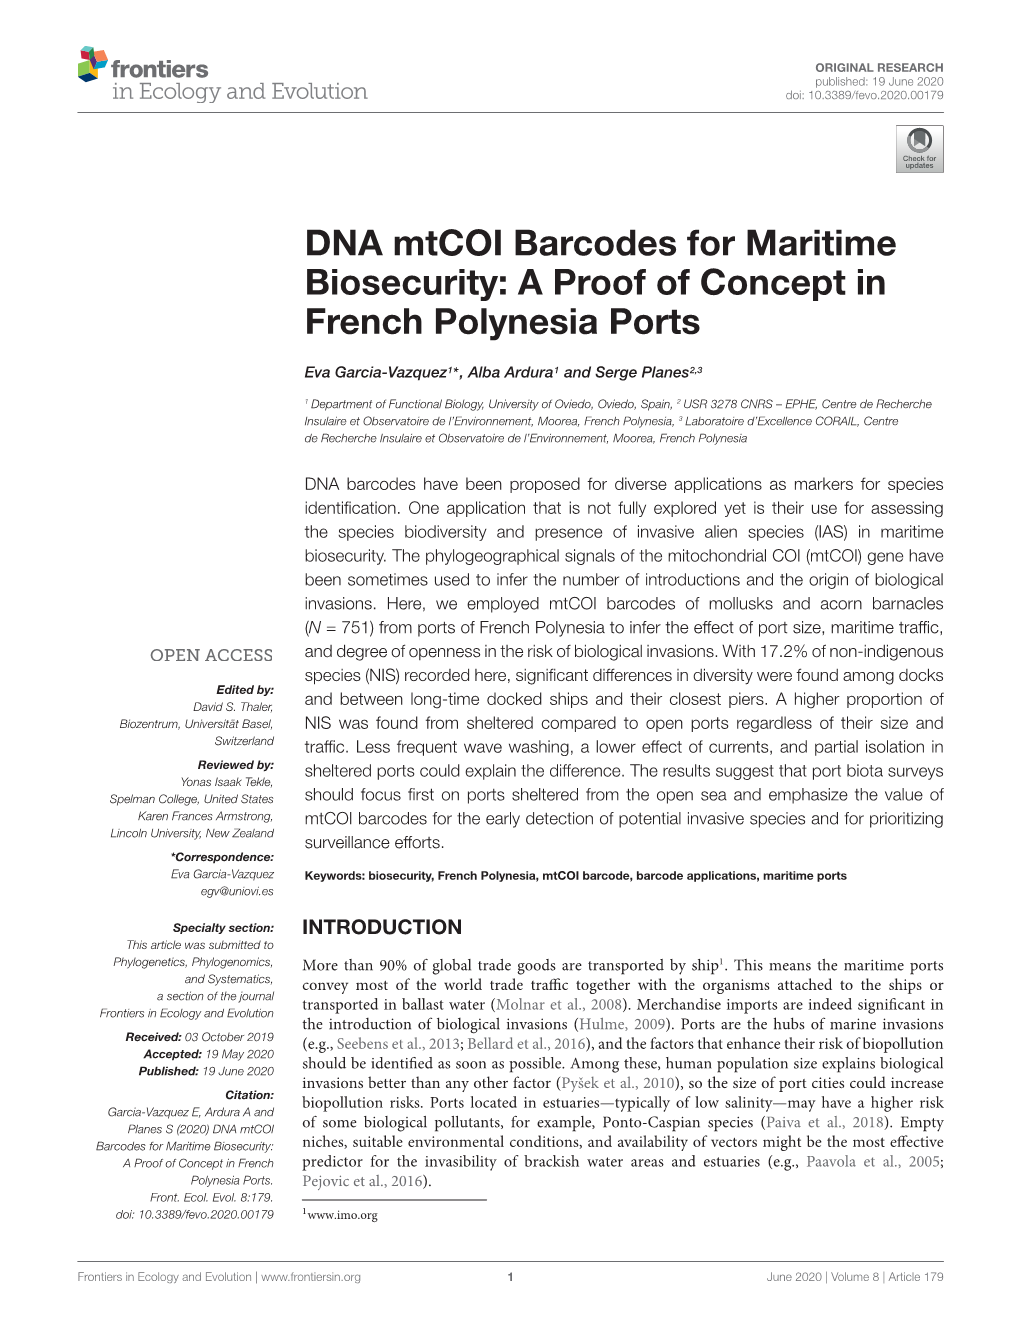 DNA Mtcoi Barcodes for Maritime Biosecurity: a Proof of Concept in French Polynesia Ports